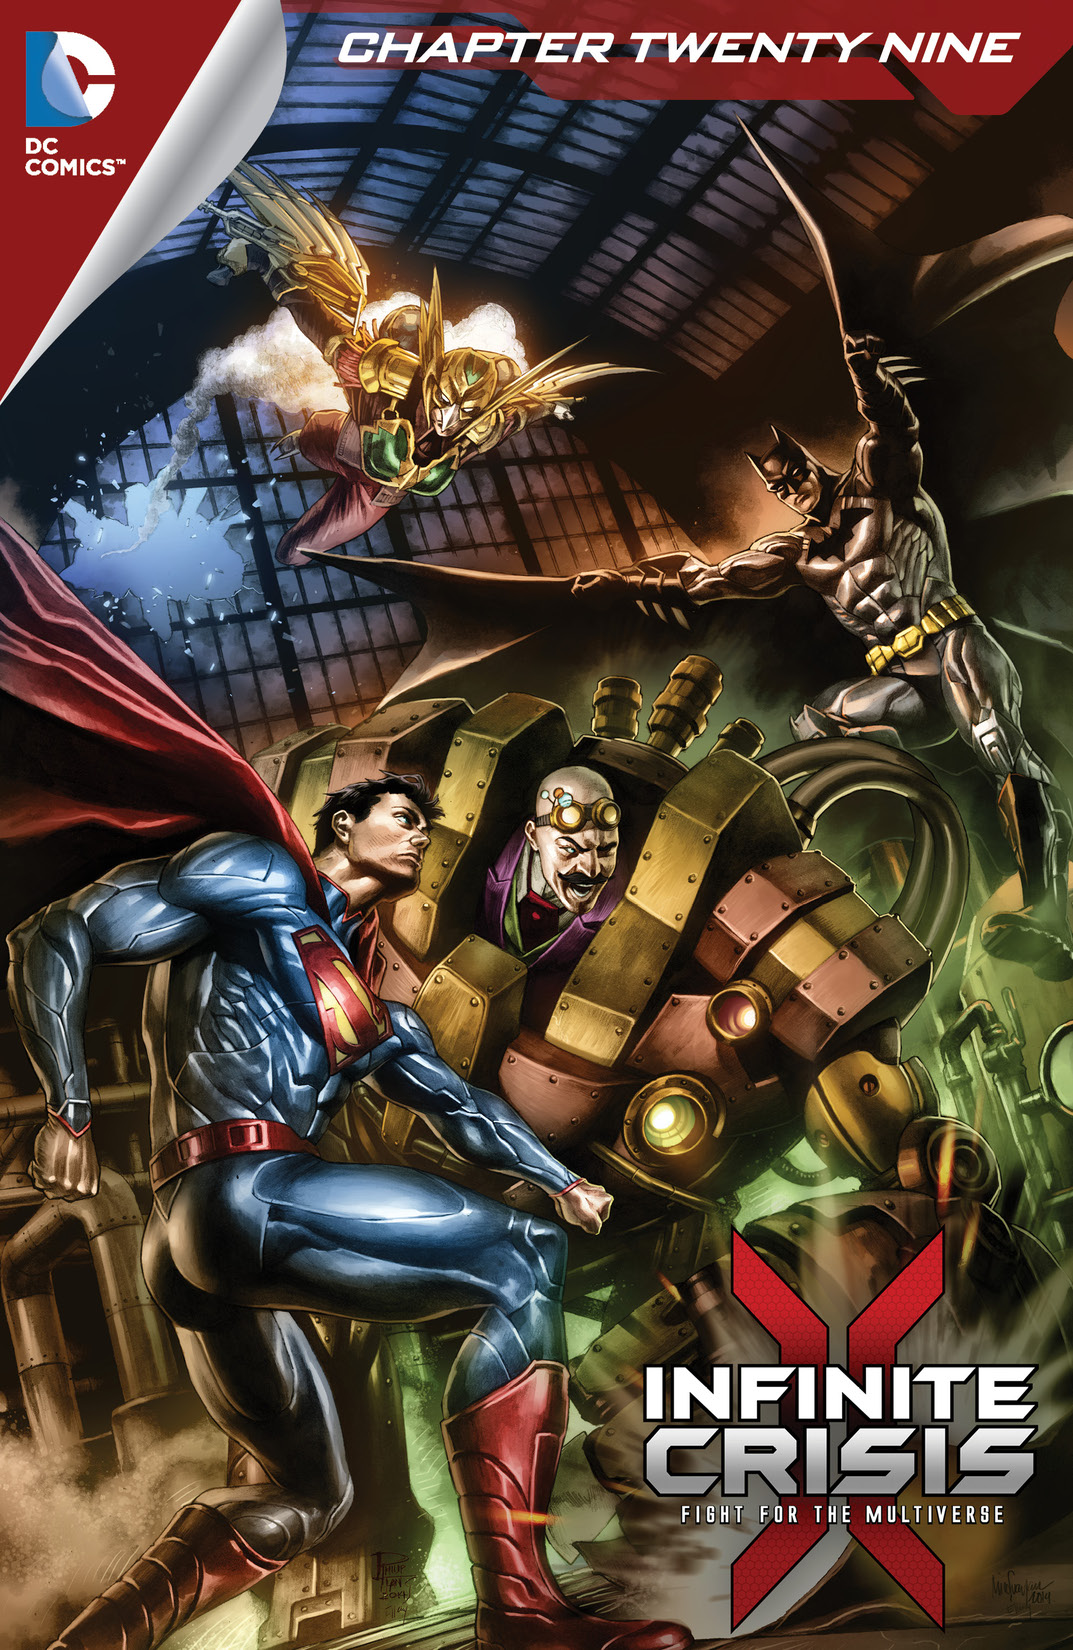 Infinite Crisis: Fight for the Multiverse #29 preview images